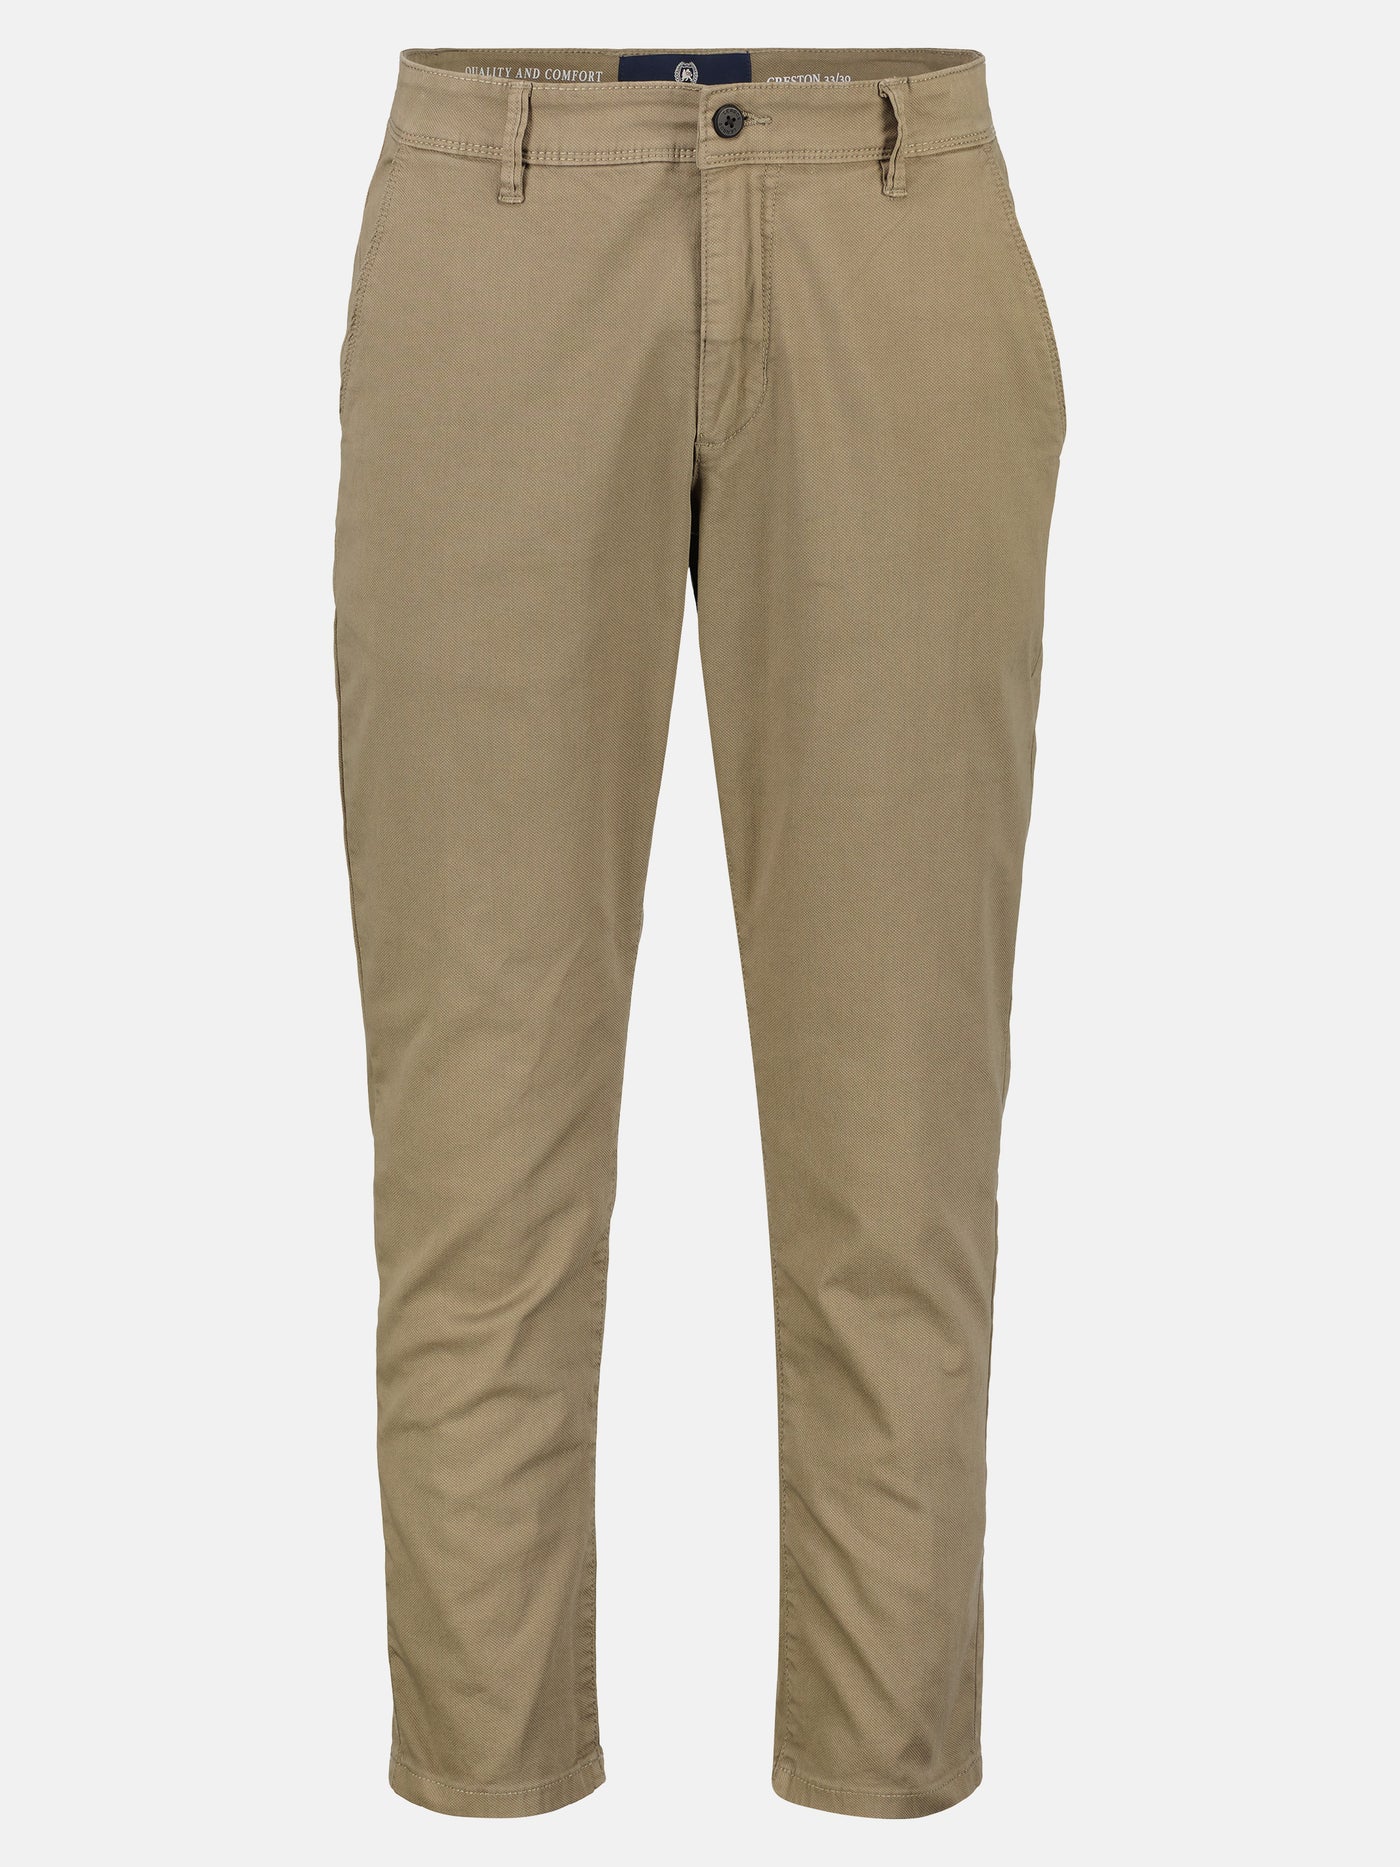 Chinos with microstructure, SLIM FIT